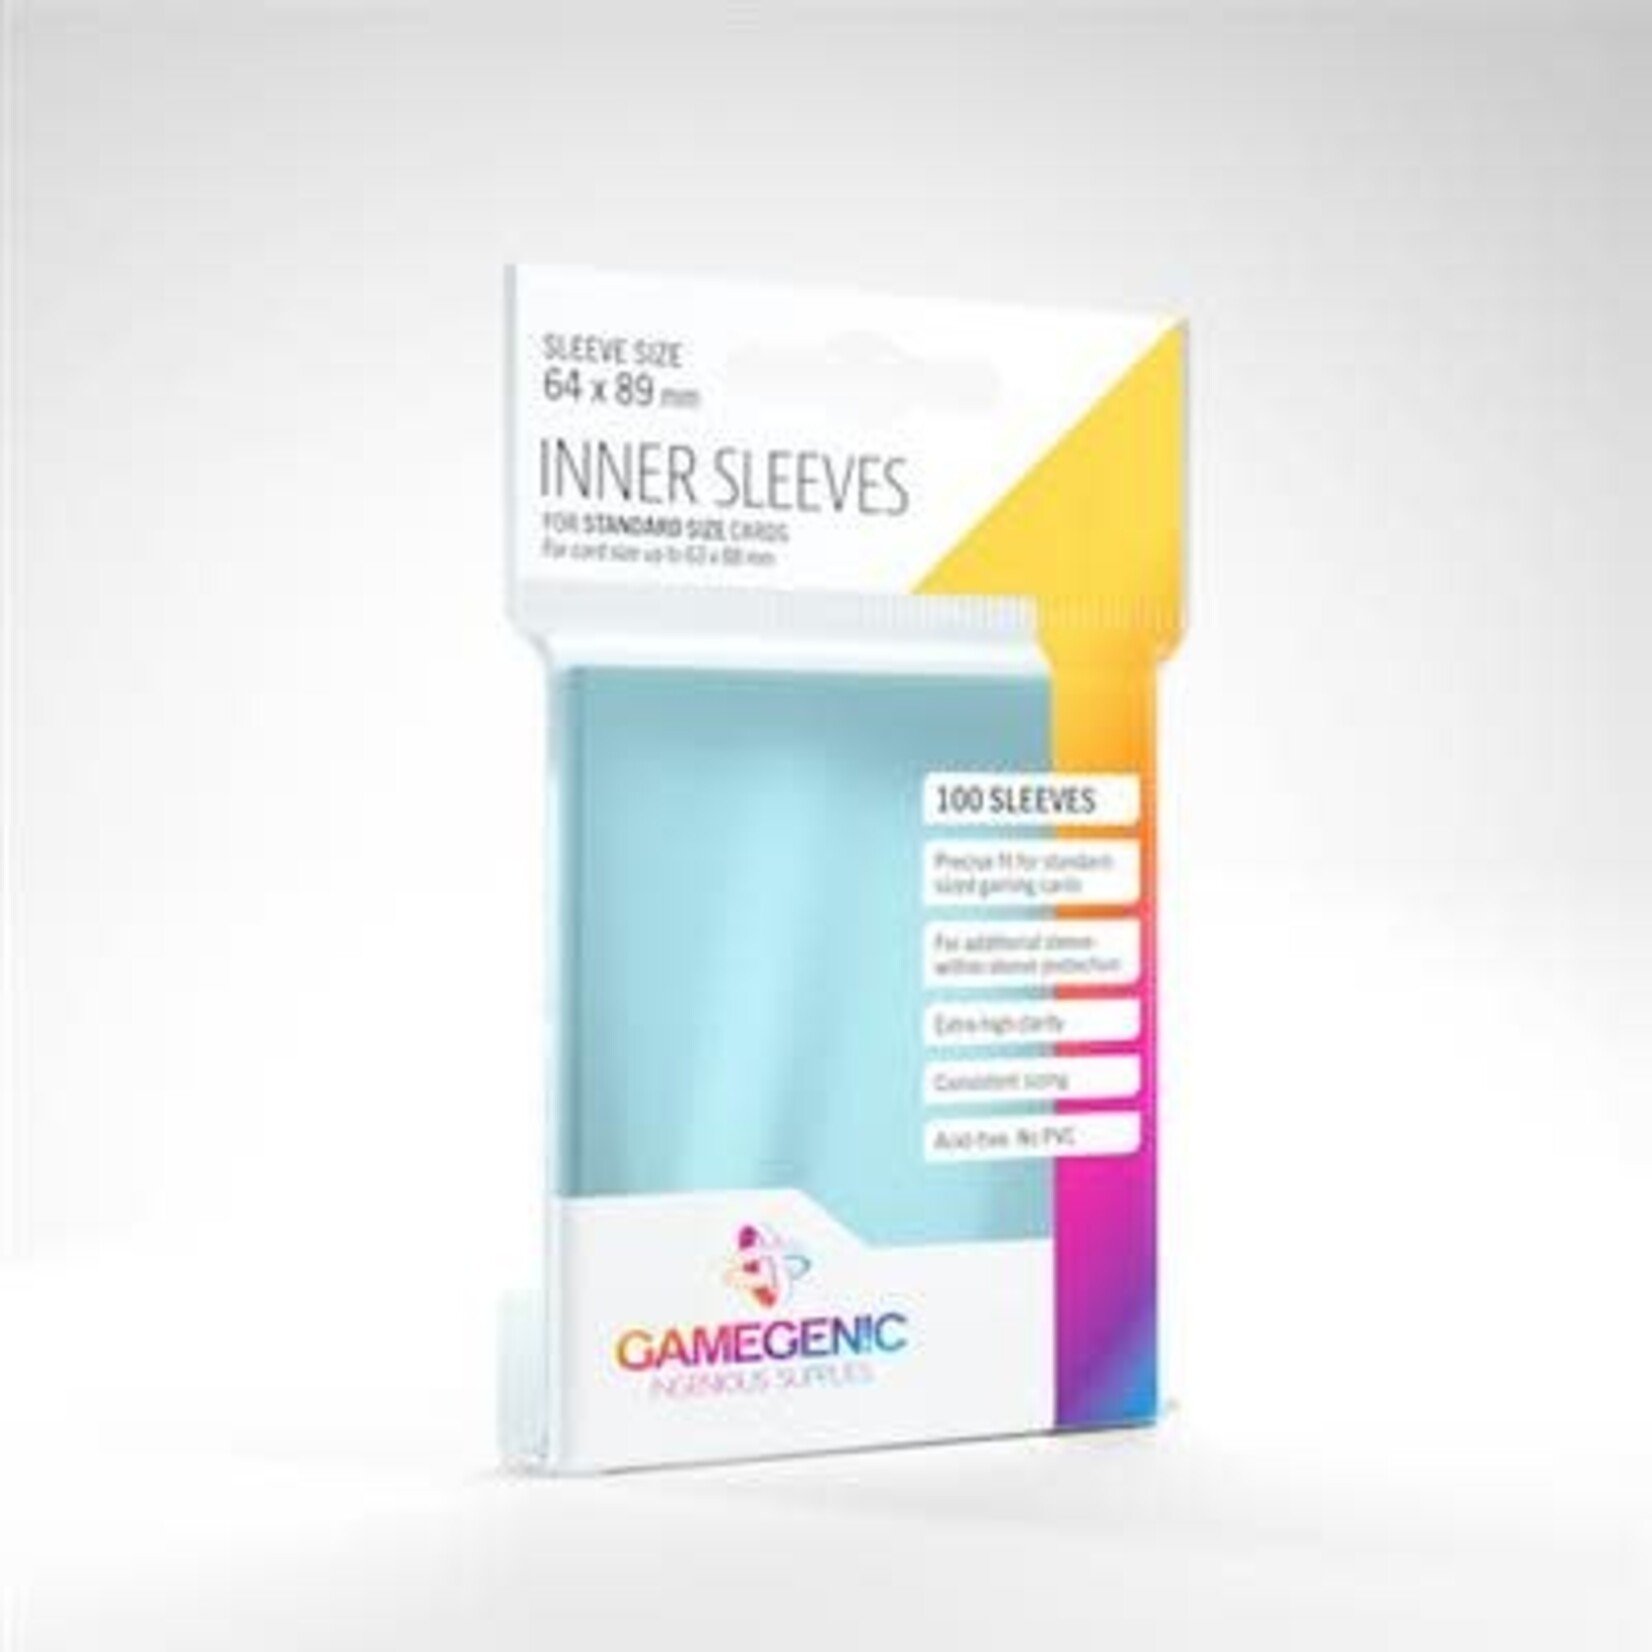 Gamegenic Gamegenic Sleeves: Inner Sleeves - 100 count (64x89mm)